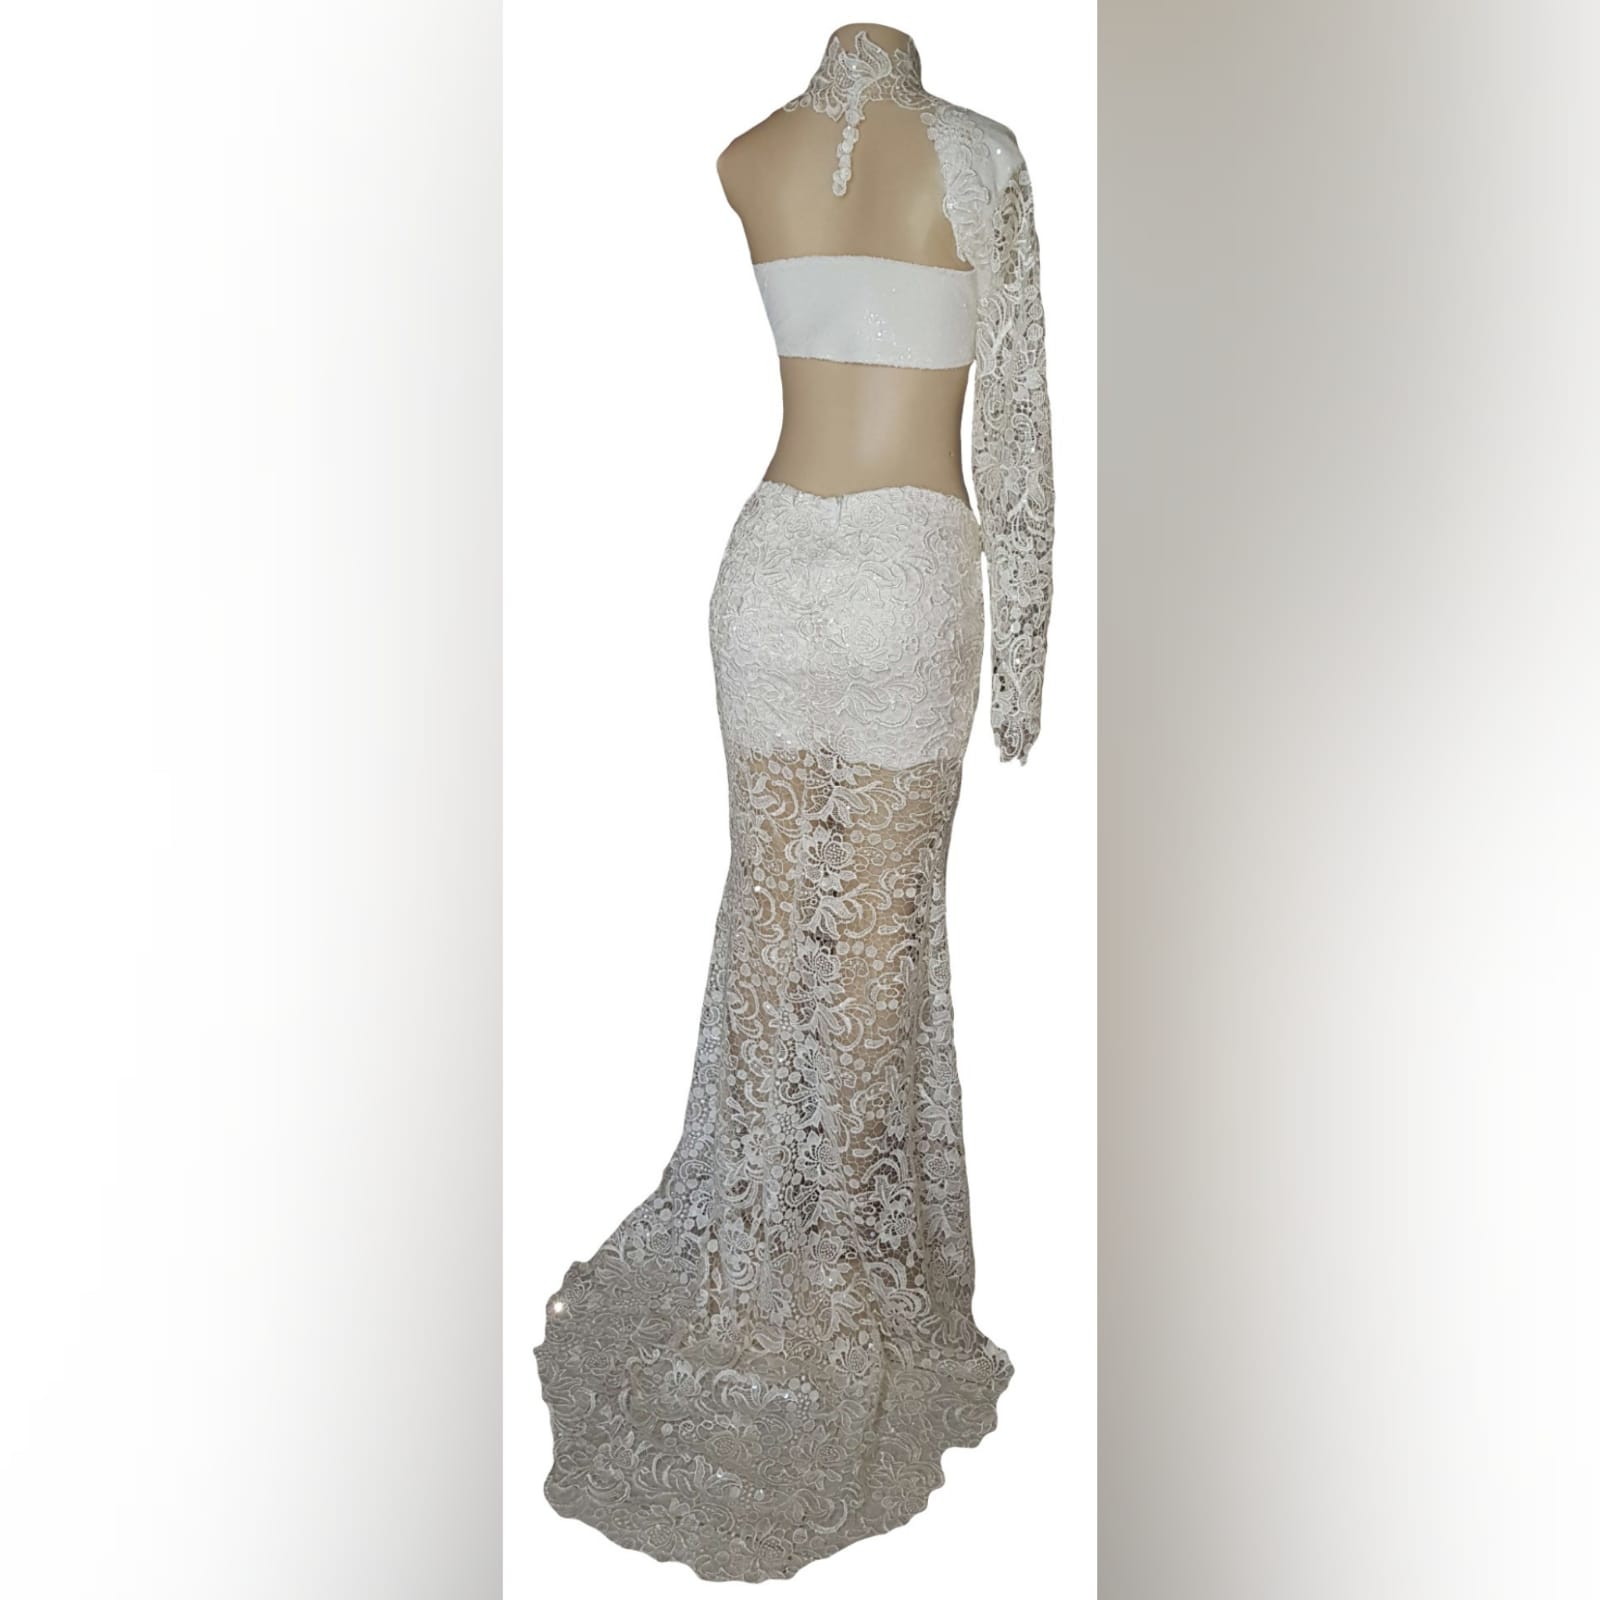 White lace long, sexy evening dress 11 white lace long, sexy evening dress created for new years eve party. With a sequins bodice, side tummy openings, naked lower back. Chocker lace neckline and a sheer long fitted sleeve. The legs are sheer lace with a middle slit and a train.